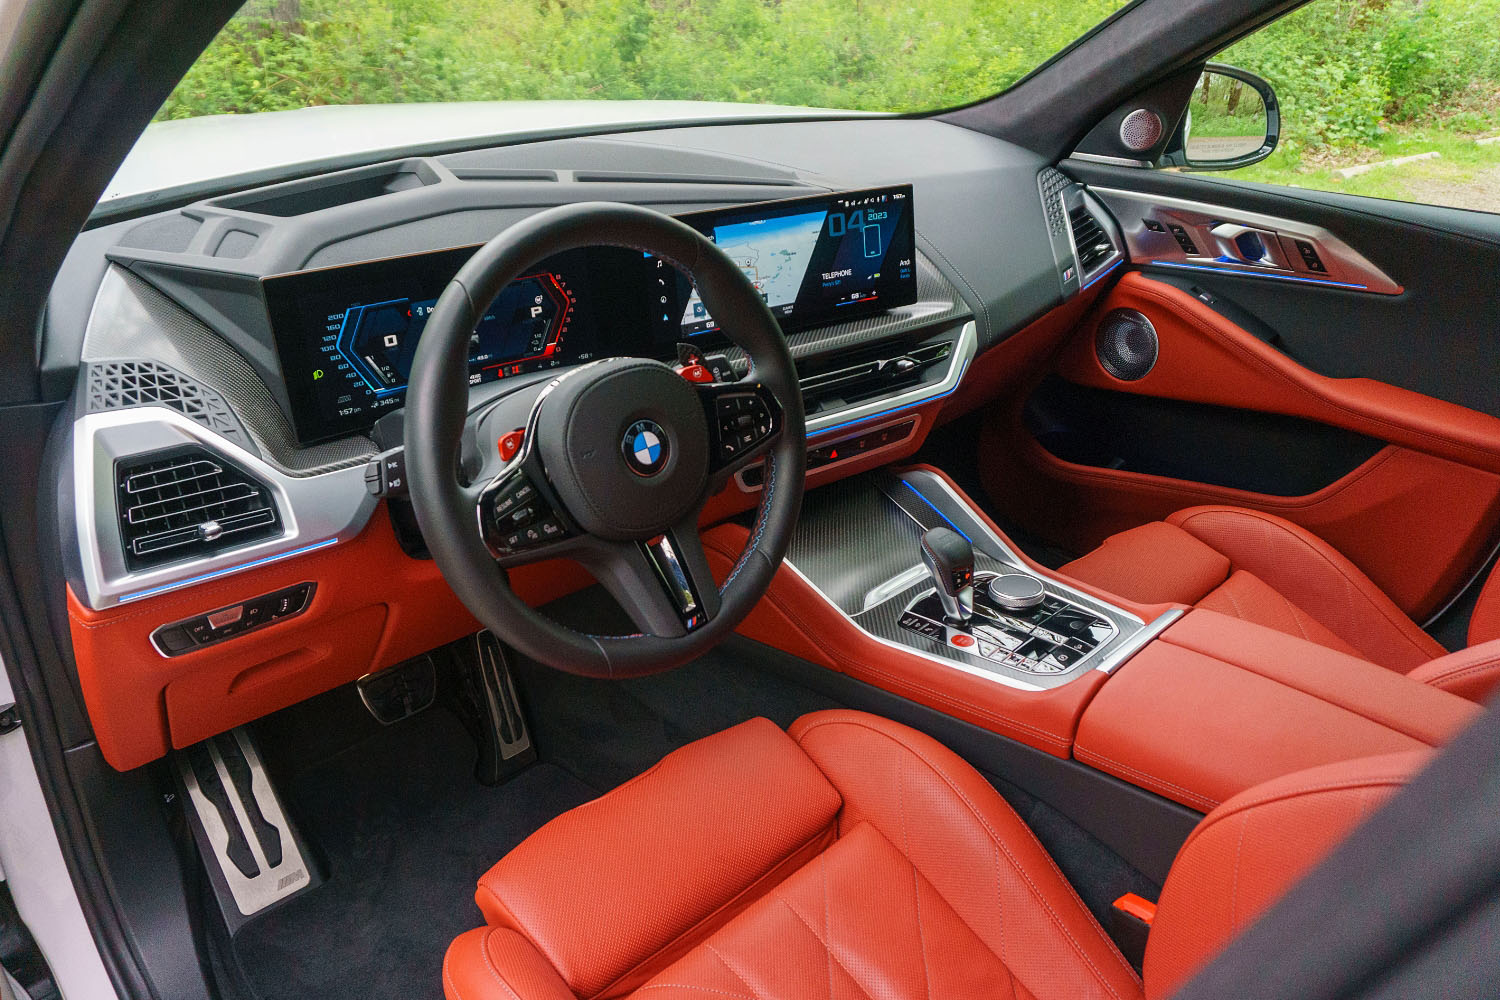 2023 BMW XM interior and dashboard with seats and lower panels in Sakhir Orange